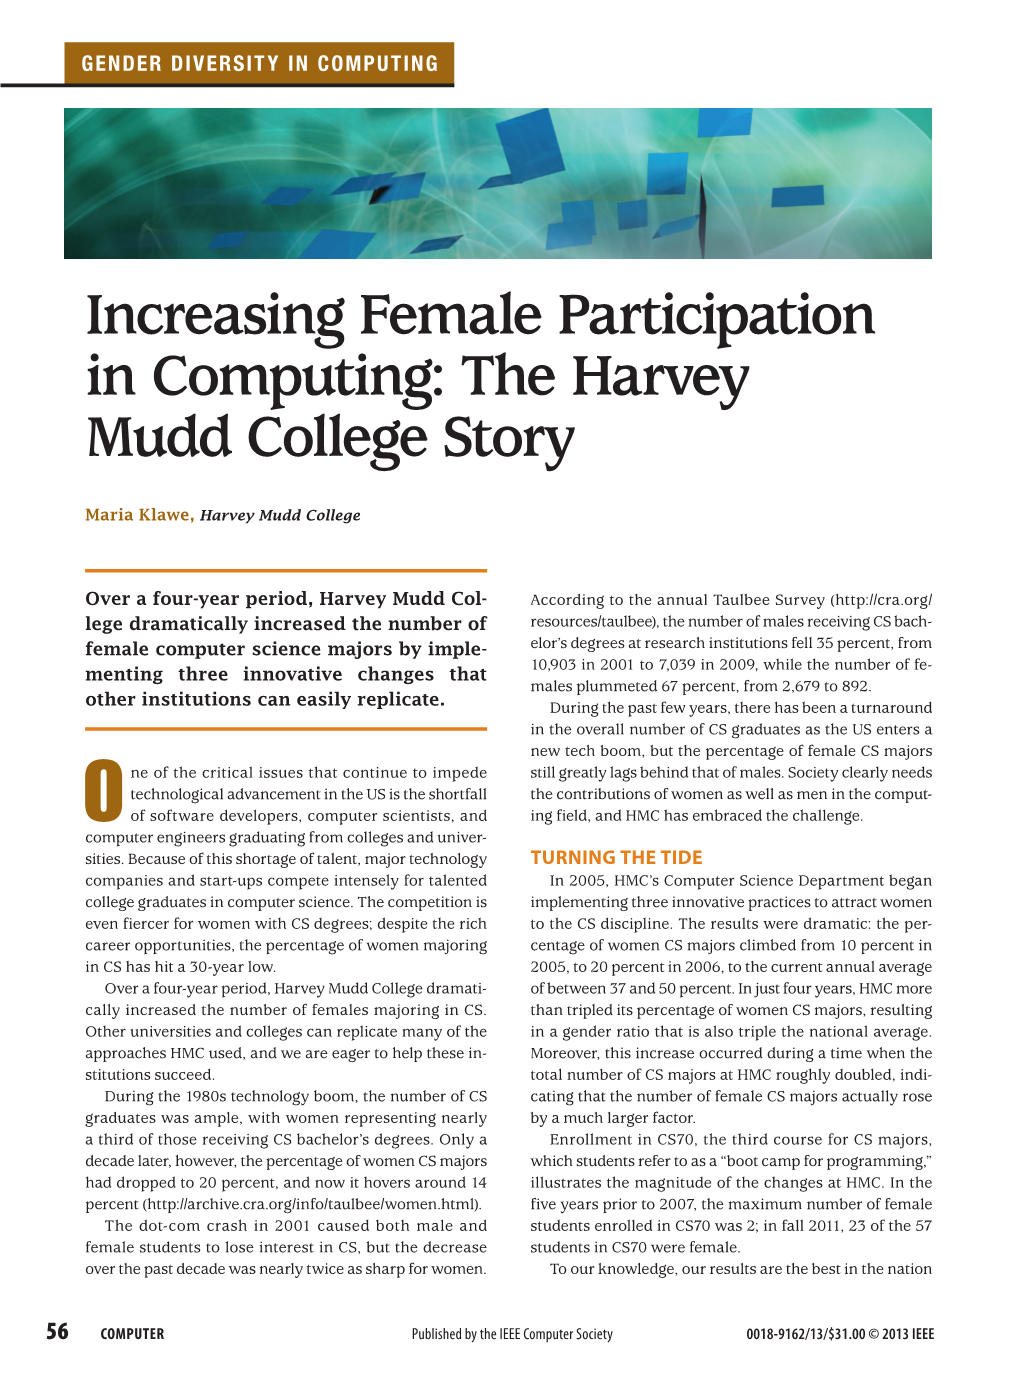 Increasing Female Participation in Computing: the Harvey Mudd College Story